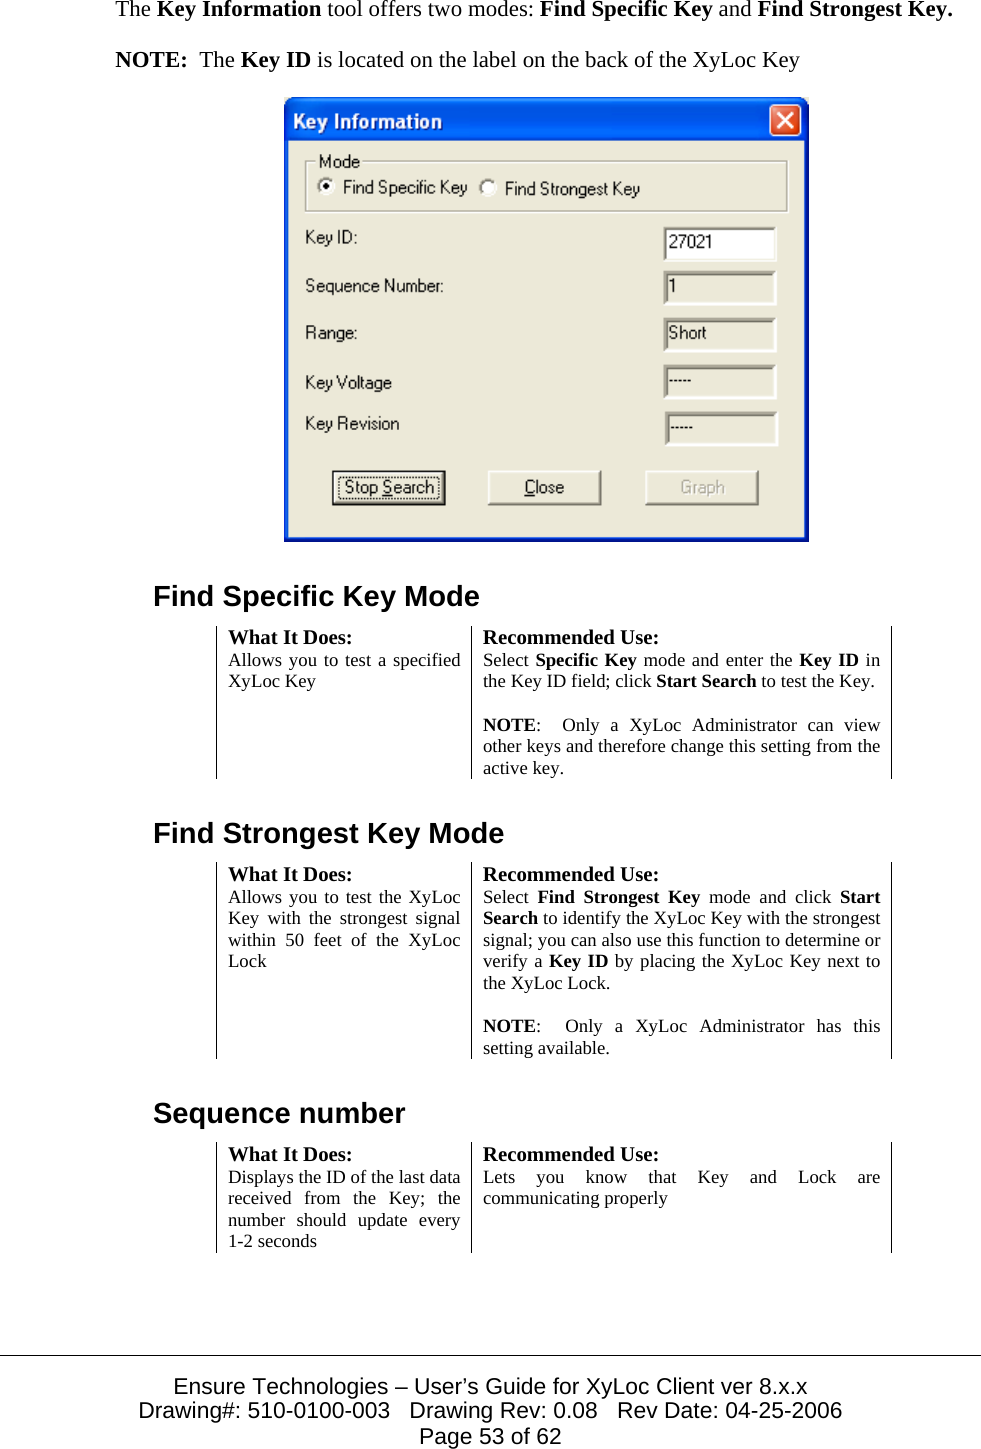  Ensure Technologies – User’s Guide for XyLoc Client ver 8.x.x Drawing#: 510-0100-003   Drawing Rev: 0.08   Rev Date: 04-25-2006 Page 53 of 62 The Key Information tool offers two modes: Find Specific Key and Find Strongest Key. NOTE:  The Key ID is located on the label on the back of the XyLoc Key  Find Specific Key Mode What It Does:  Recommended Use: Allows you to test a specified XyLoc Key Select Specific Key mode and enter the Key ID in the Key ID field; click Start Search to test the Key.  NOTE:  Only a XyLoc Administrator can view other keys and therefore change this setting from the active key.Find Strongest Key Mode What It Does:  Recommended Use: Allows you to test the XyLoc Key with the strongest signal within 50 feet of the XyLoc Lock Select  Find Strongest Key mode and click Start Search to identify the XyLoc Key with the strongest signal; you can also use this function to determine or verify a Key ID by placing the XyLoc Key next to the XyLoc Lock.  NOTE:  Only a XyLoc Administrator has this setting available.Sequence number What It Does:  Recommended Use: Displays the ID of the last data received from the Key; the number should update every 1-2 seconds Lets you know that Key and Lock are communicating properly 